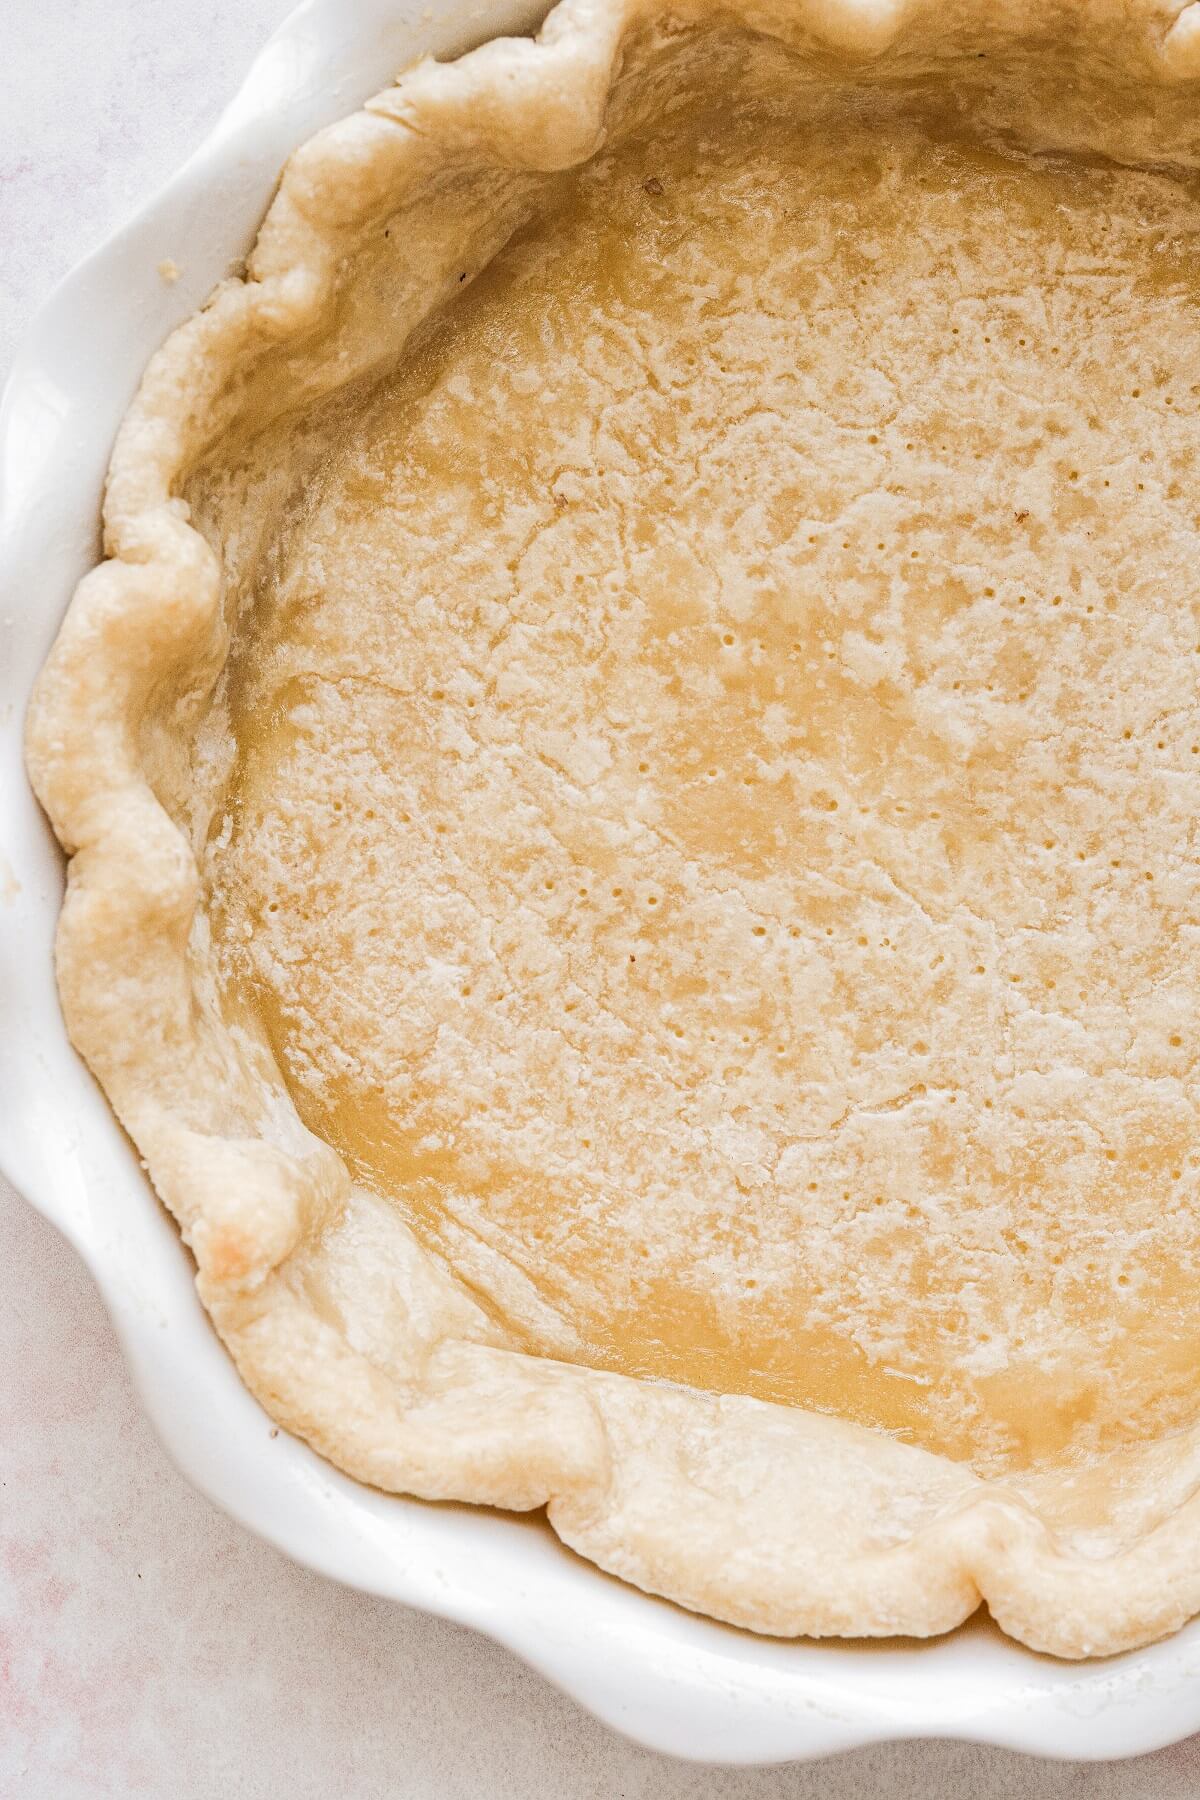 A pre-baked pie crust in a white pie pan.